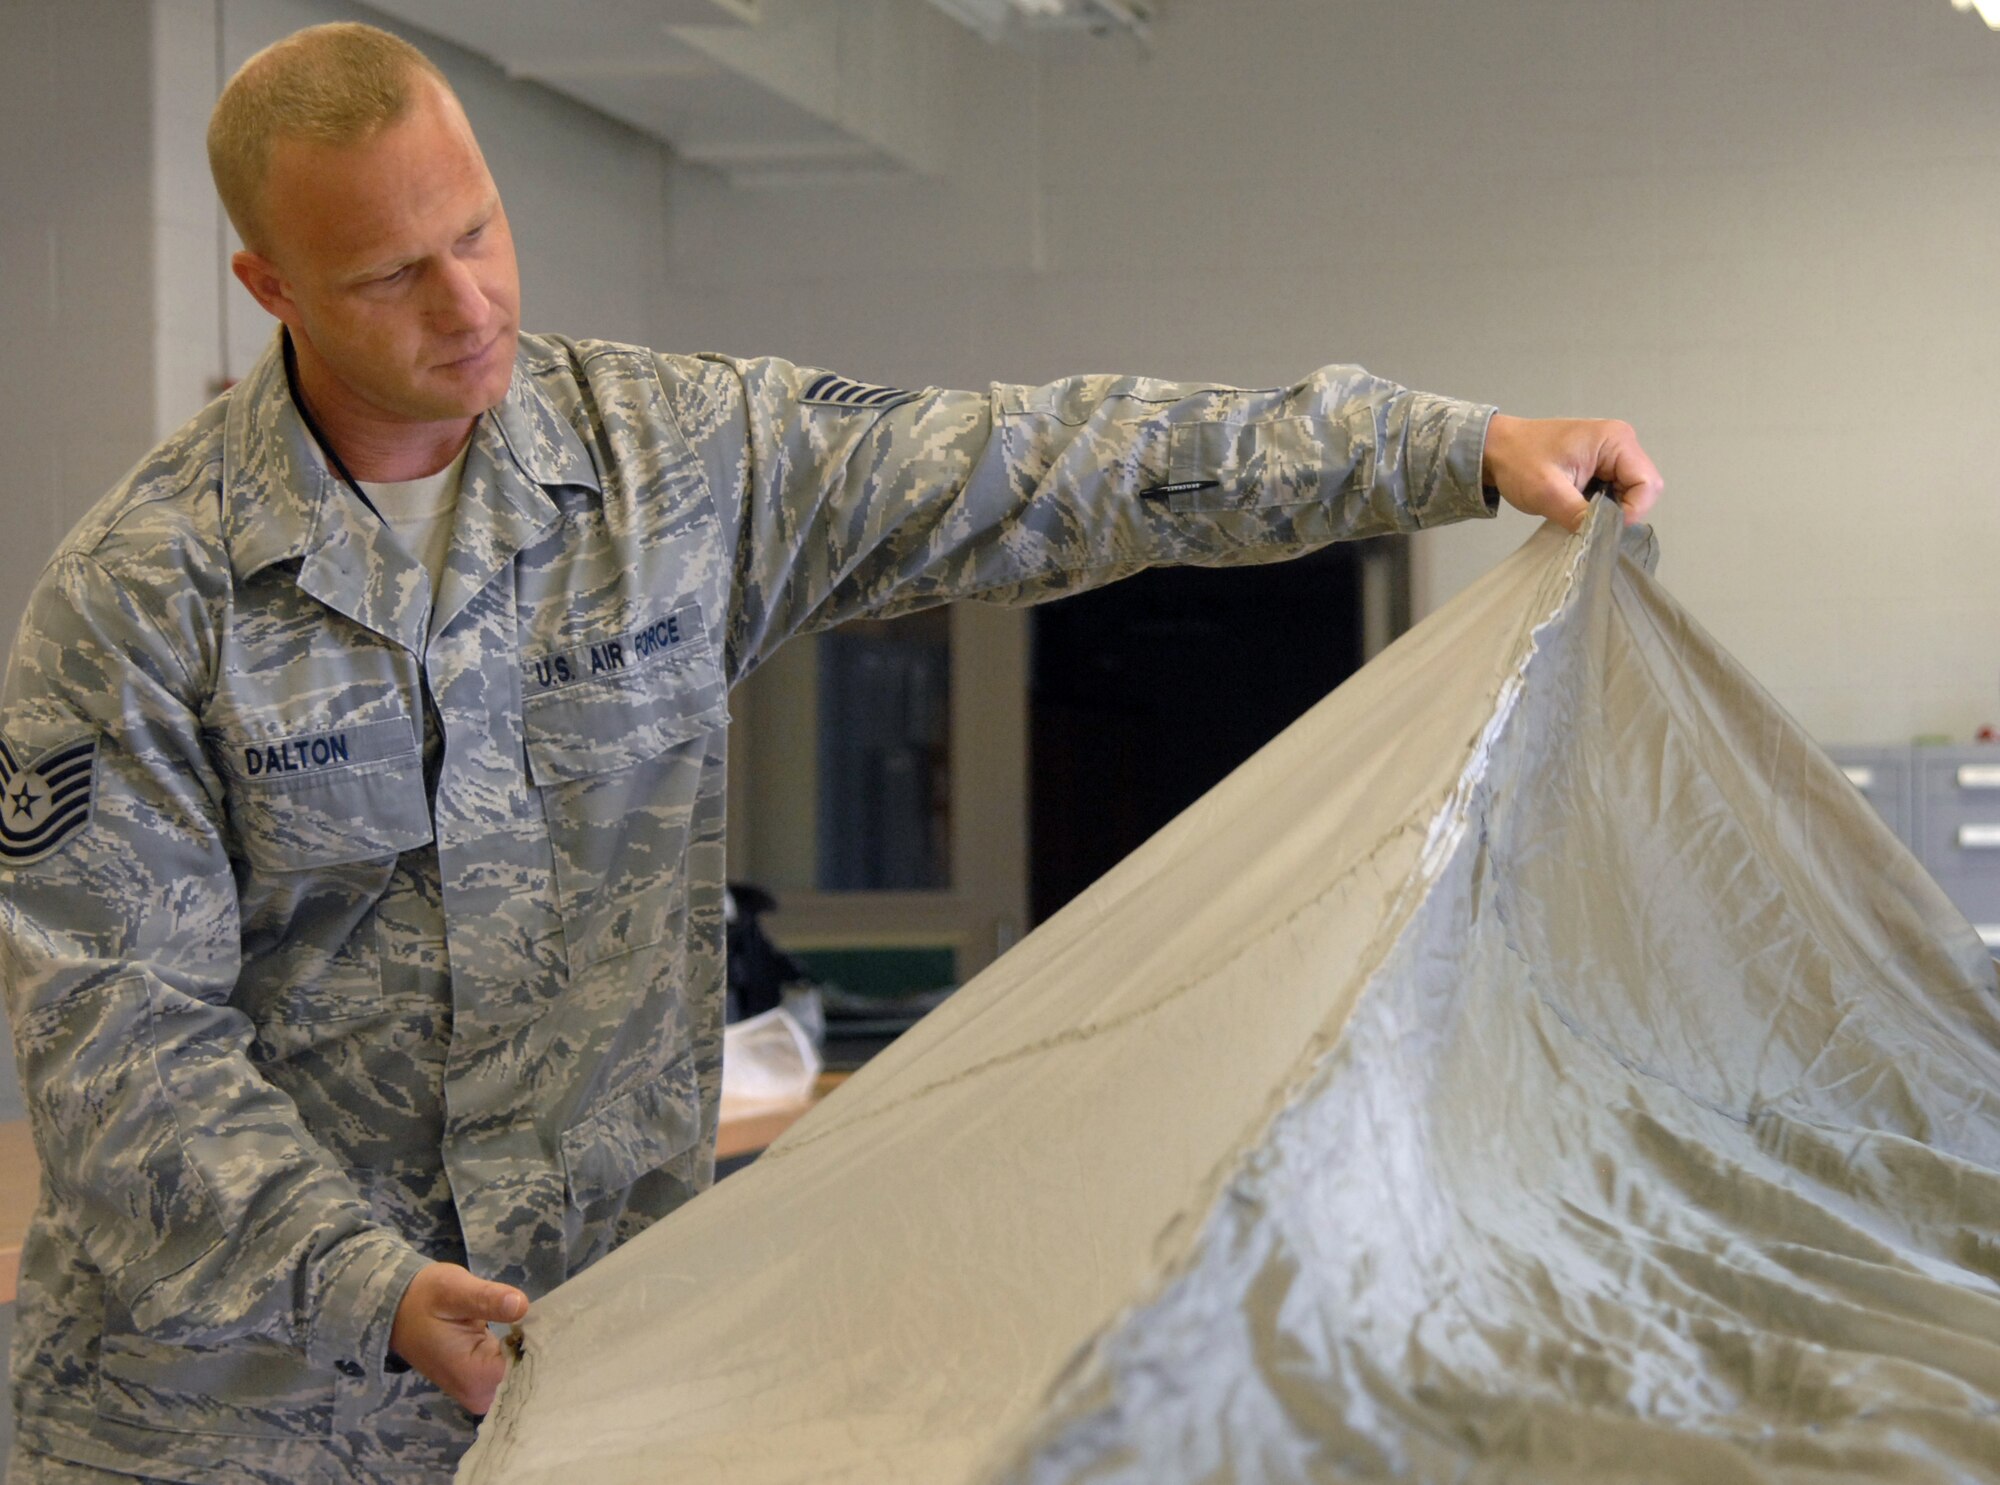 WHITEMAN AIR FORCE BASE, Mo., -- Tech Sgt. Clinton Dalton 509th Operations Group NCO in charge of quality assurance, inspects the BA-22 parachute canopy. The room must maintain a certain temperature and humidity to prevent moisture from hindering chute deployment. 
(U.S. Air Force photo/Staff Sgt. Jason Huddleston) (Released)

